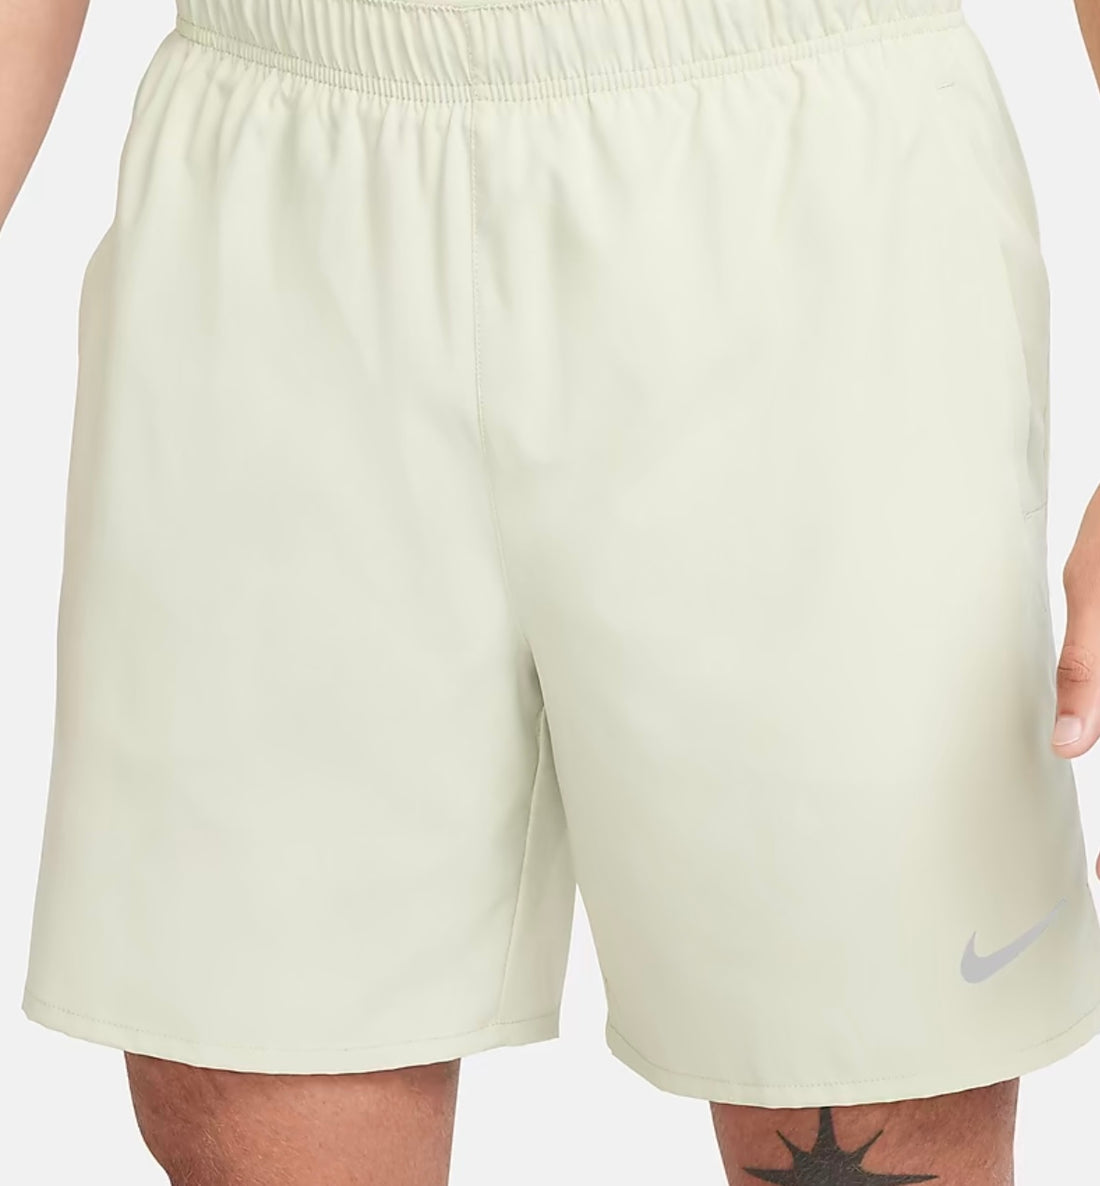 NIKE CHALLENGER SHORTS (7 INCH) - OLIVE